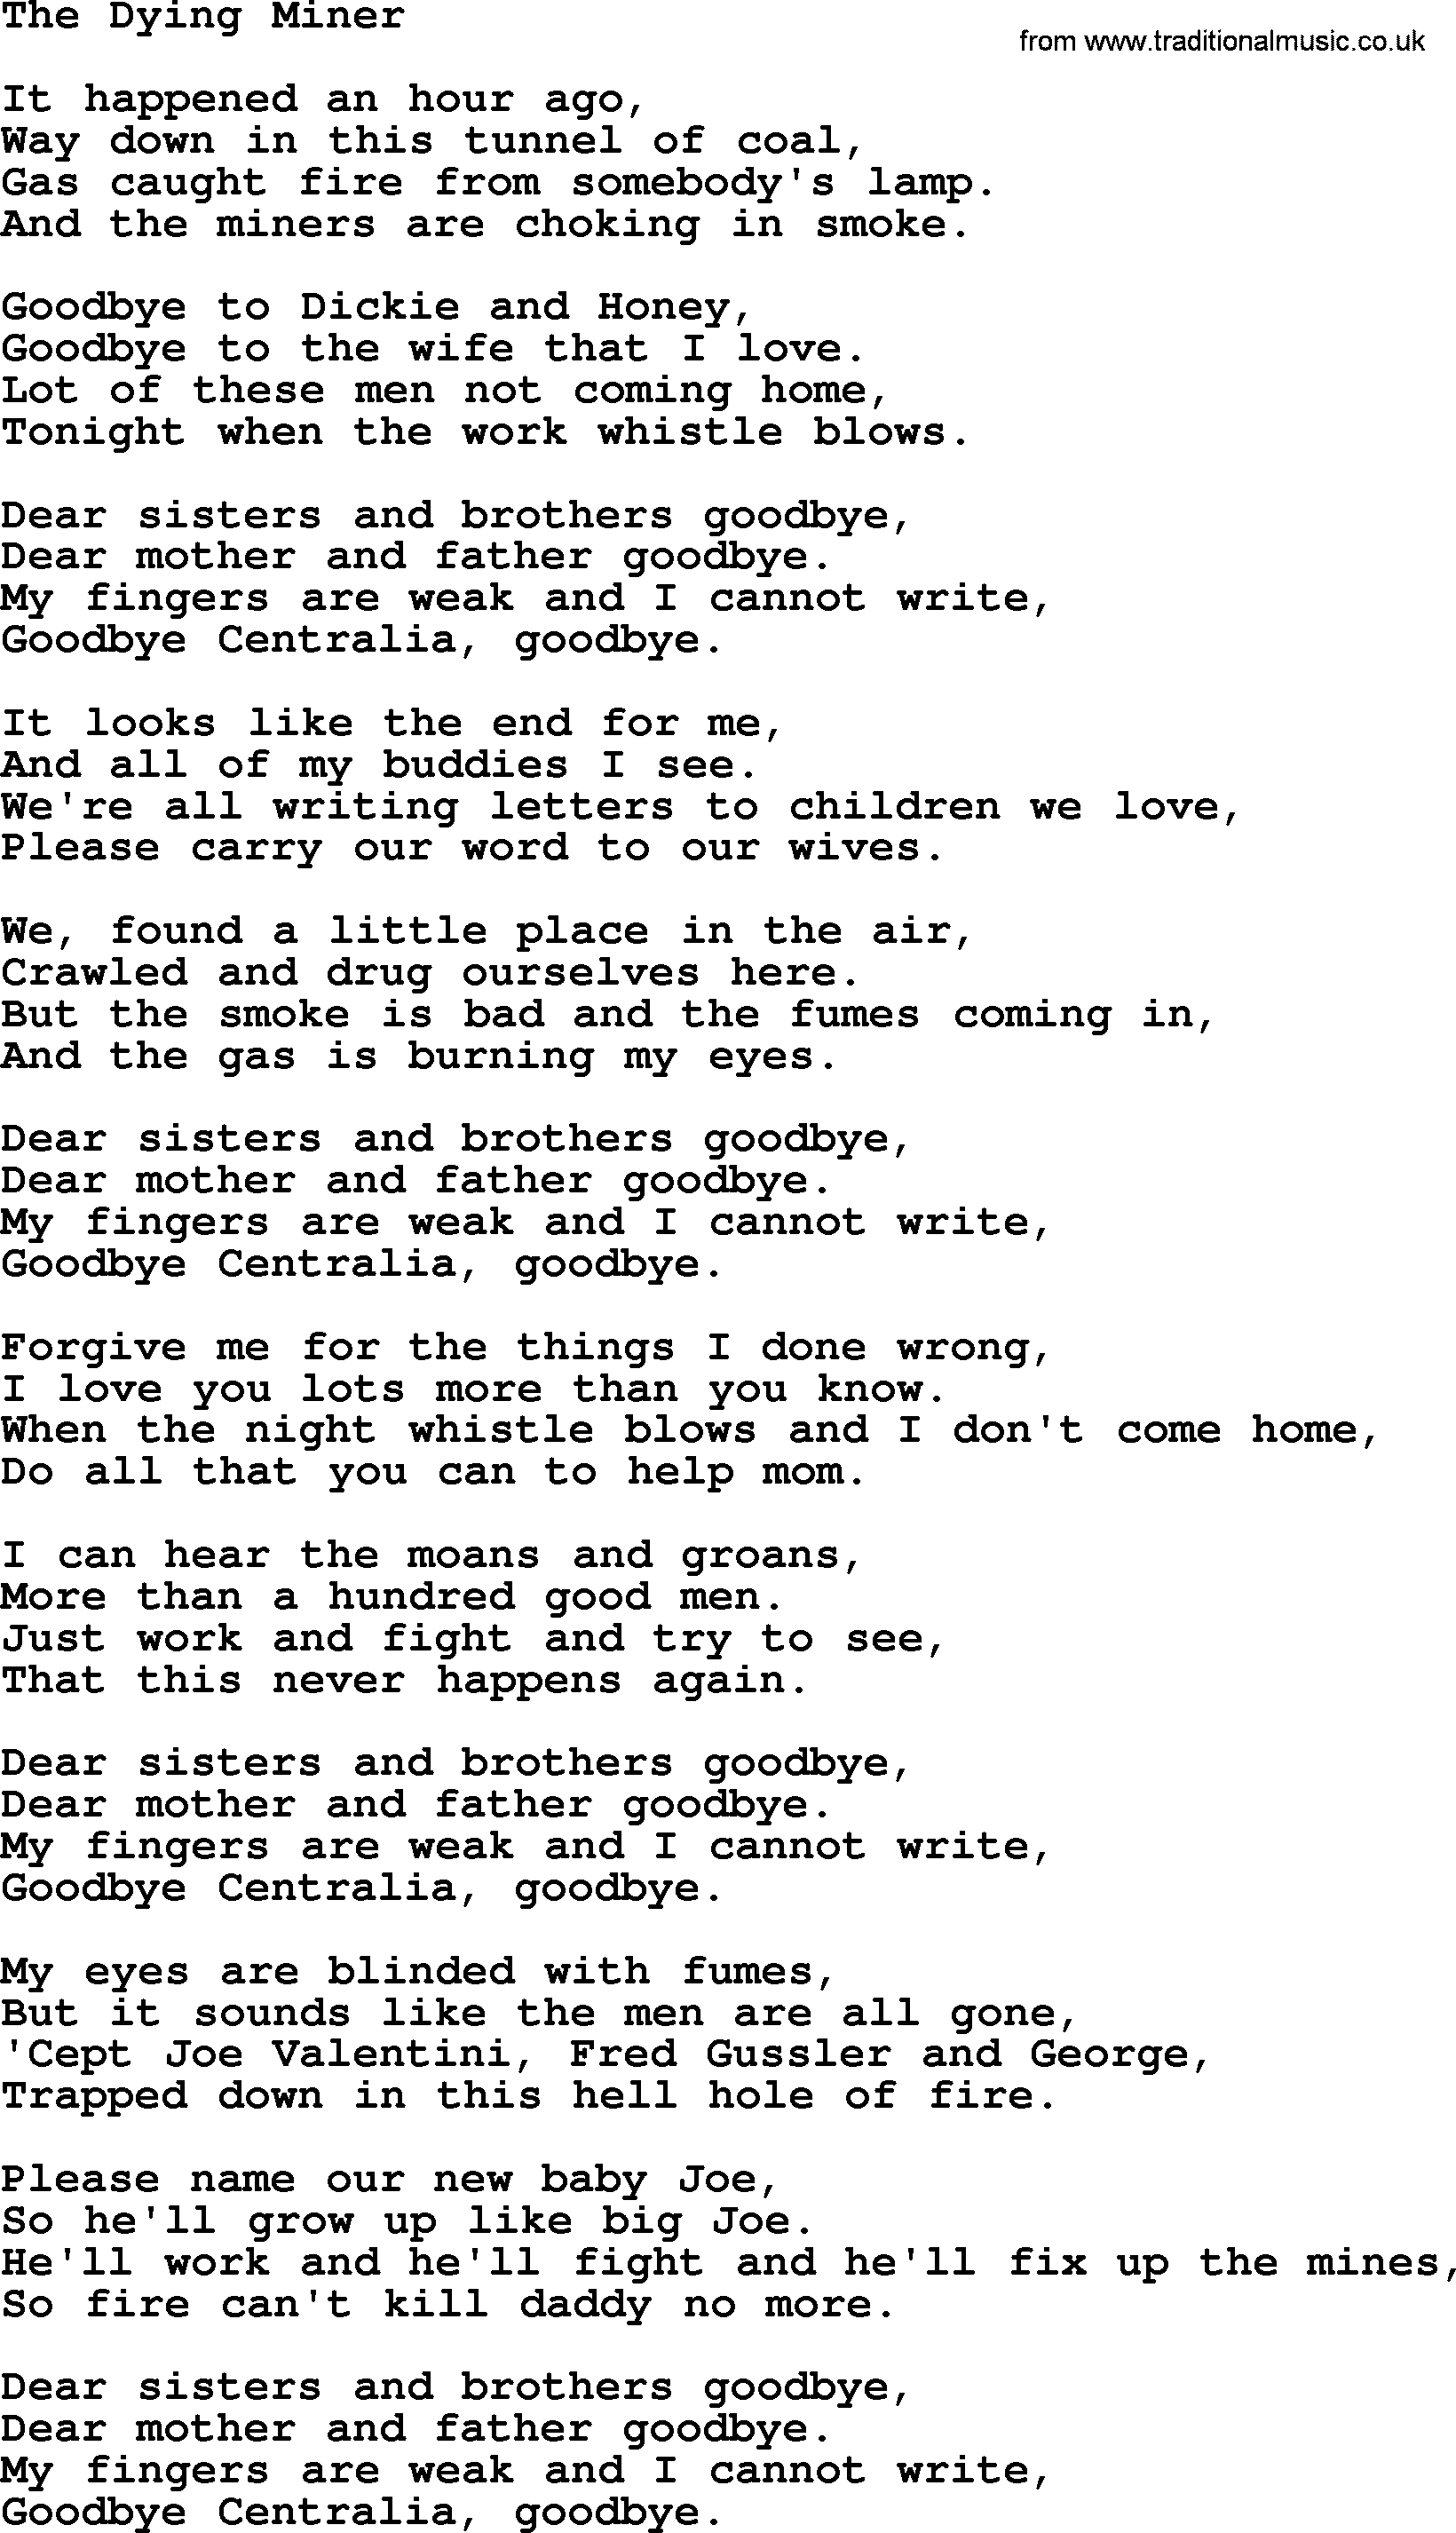 Woody Guthrie song The Dying Miner lyrics